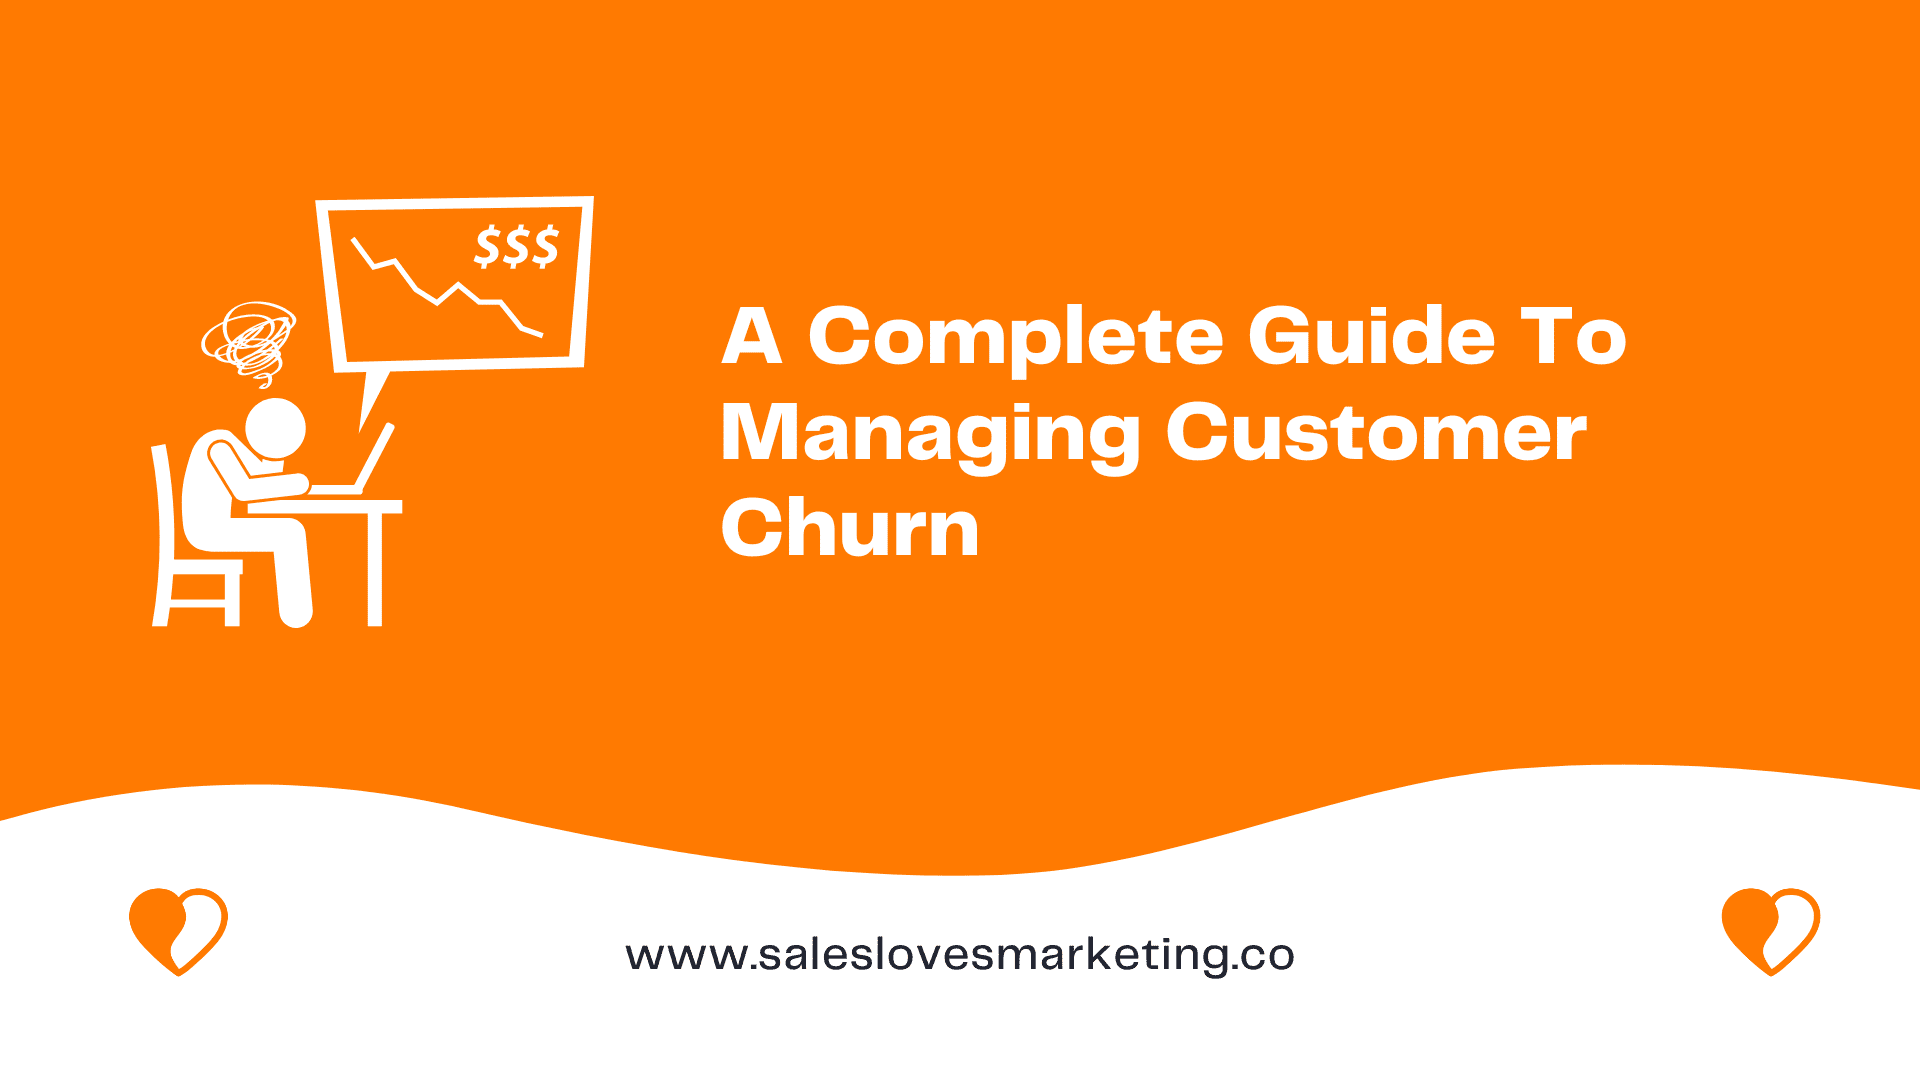 A Complete Guide To Managing Customer Churn